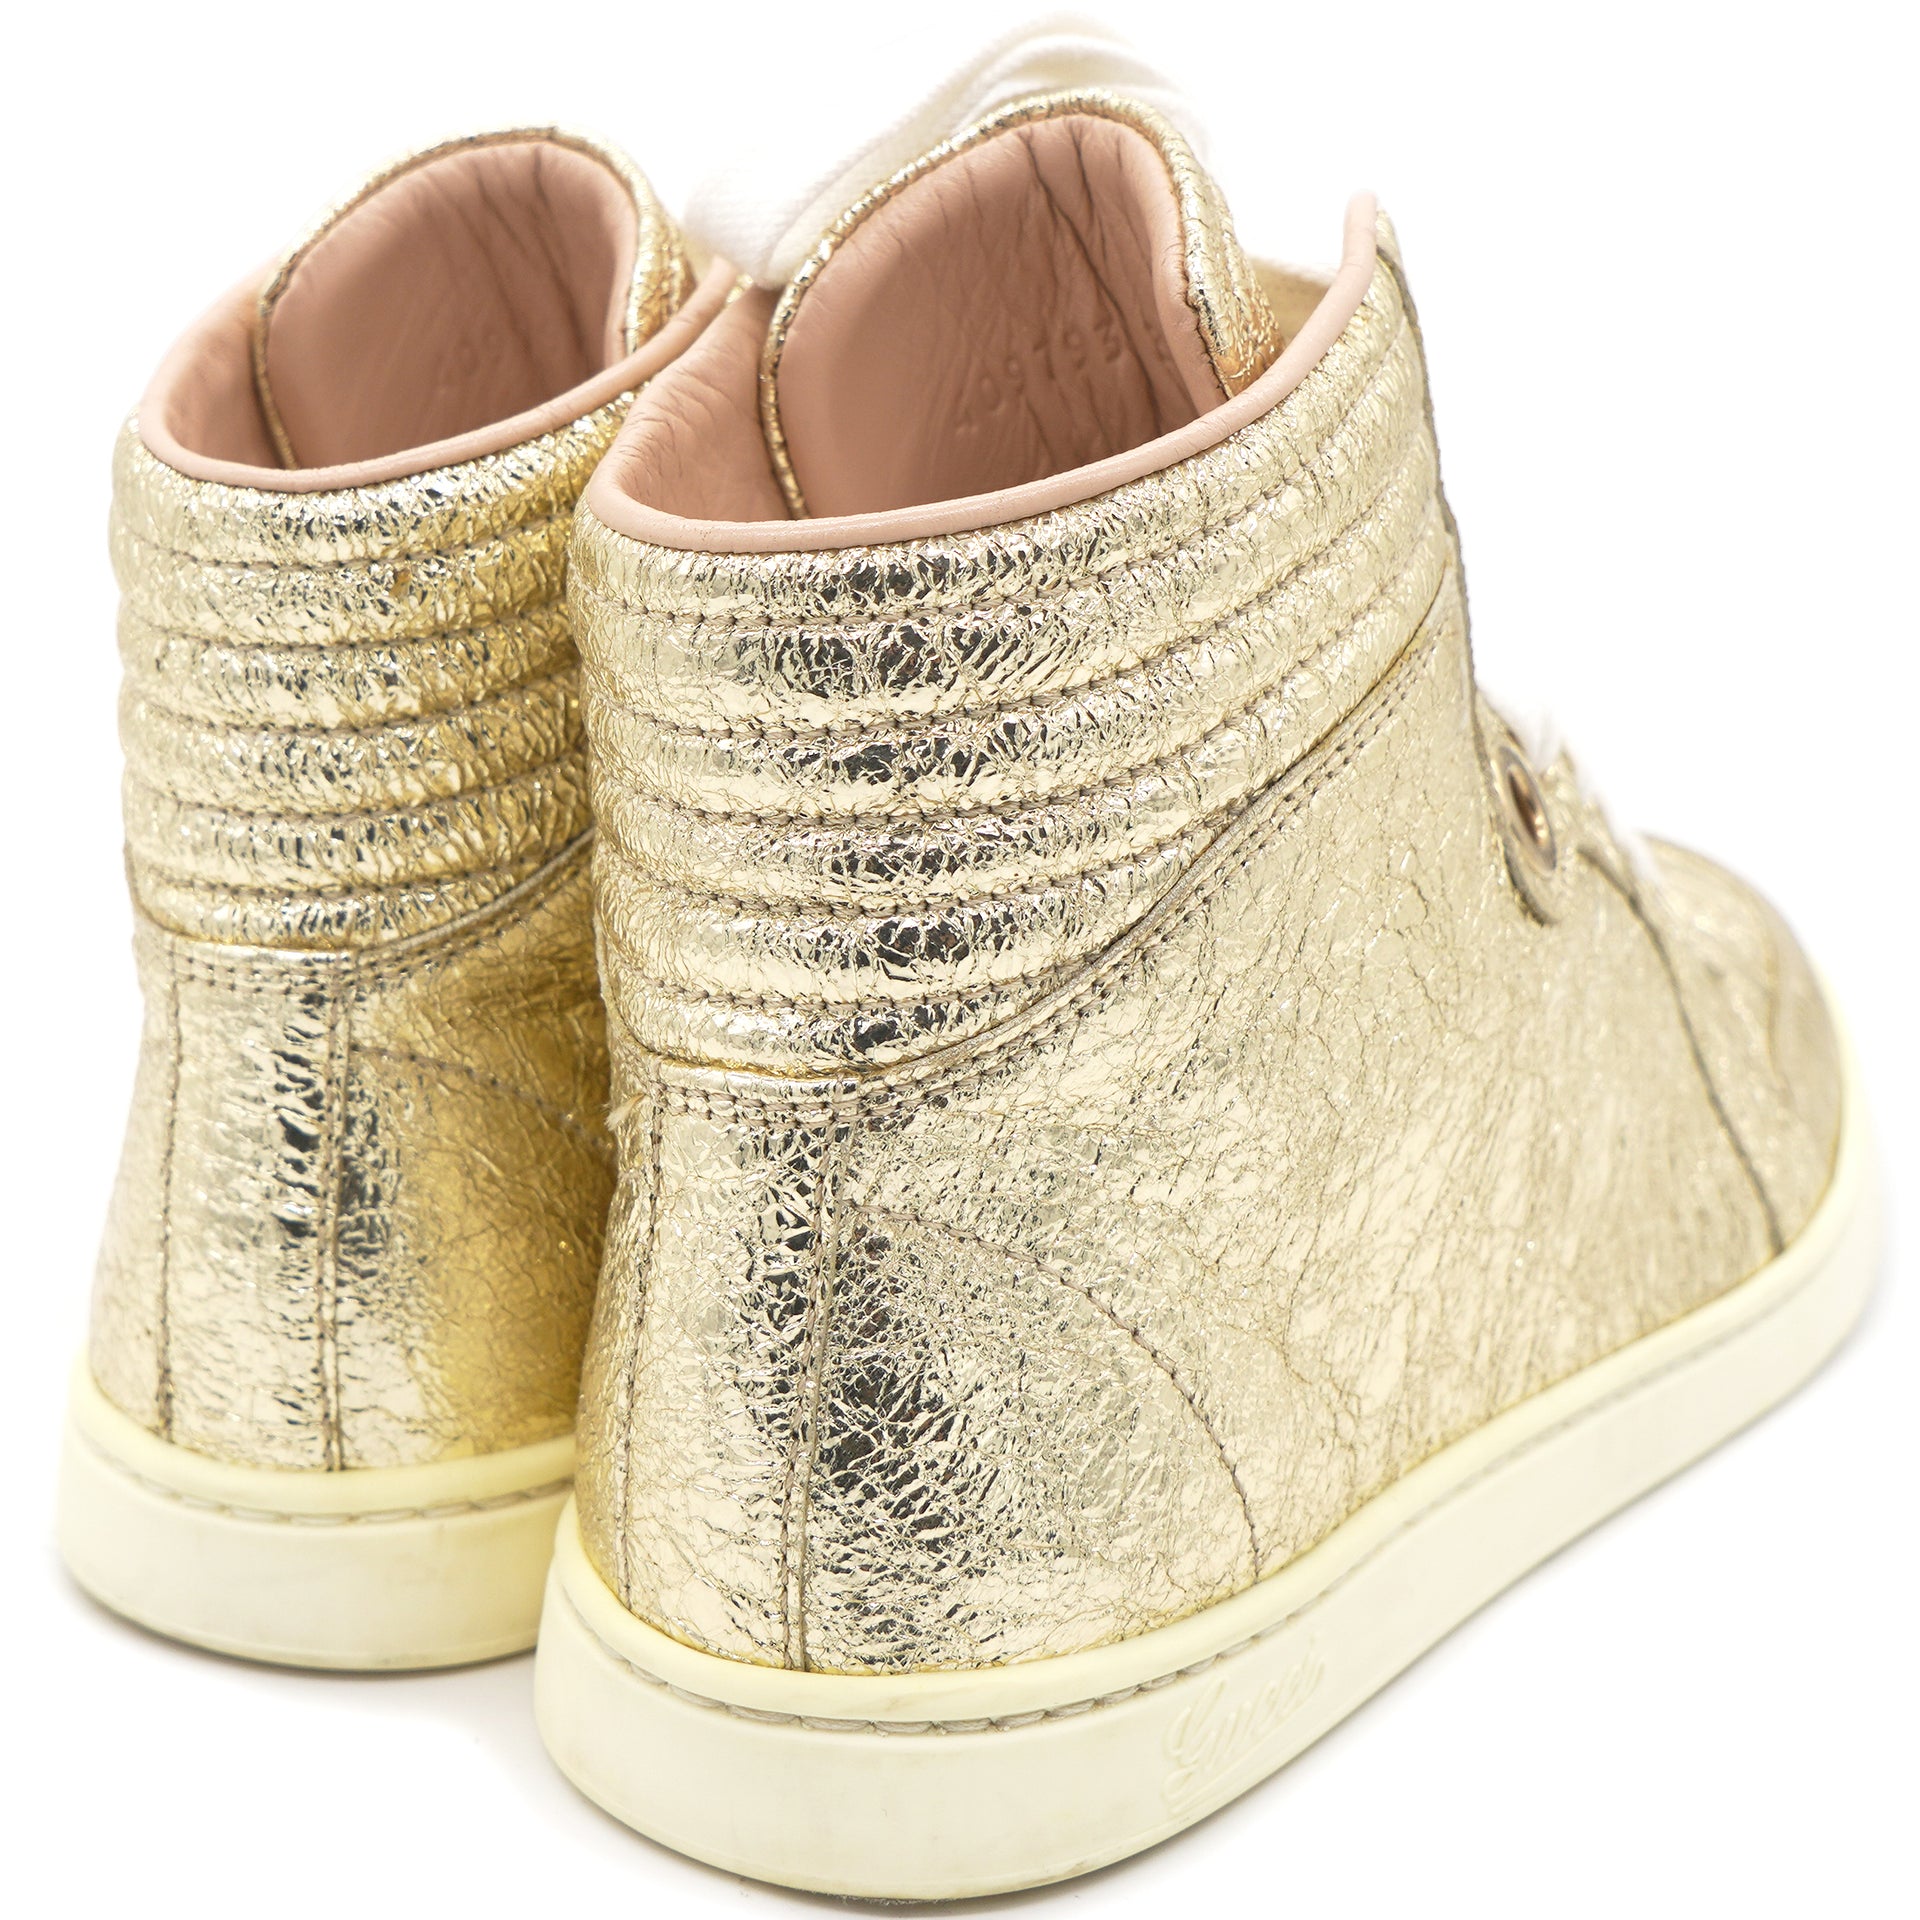 Gucci Diamante Leather High-top Sneaker in Yellow for Men